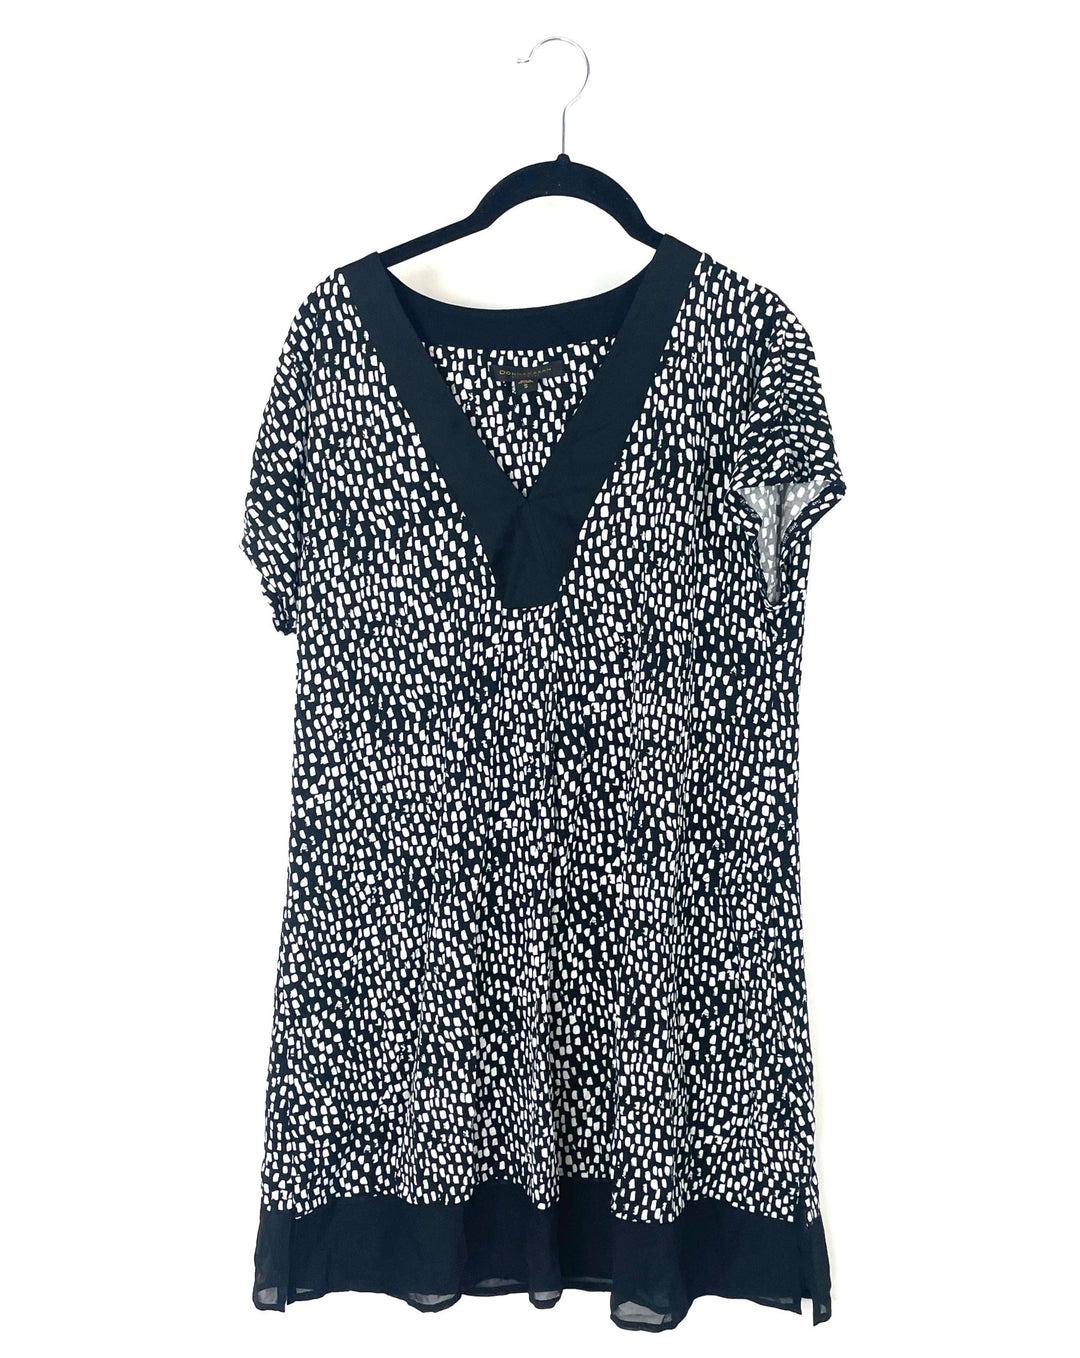 Black and White Printed Night Gown - Small